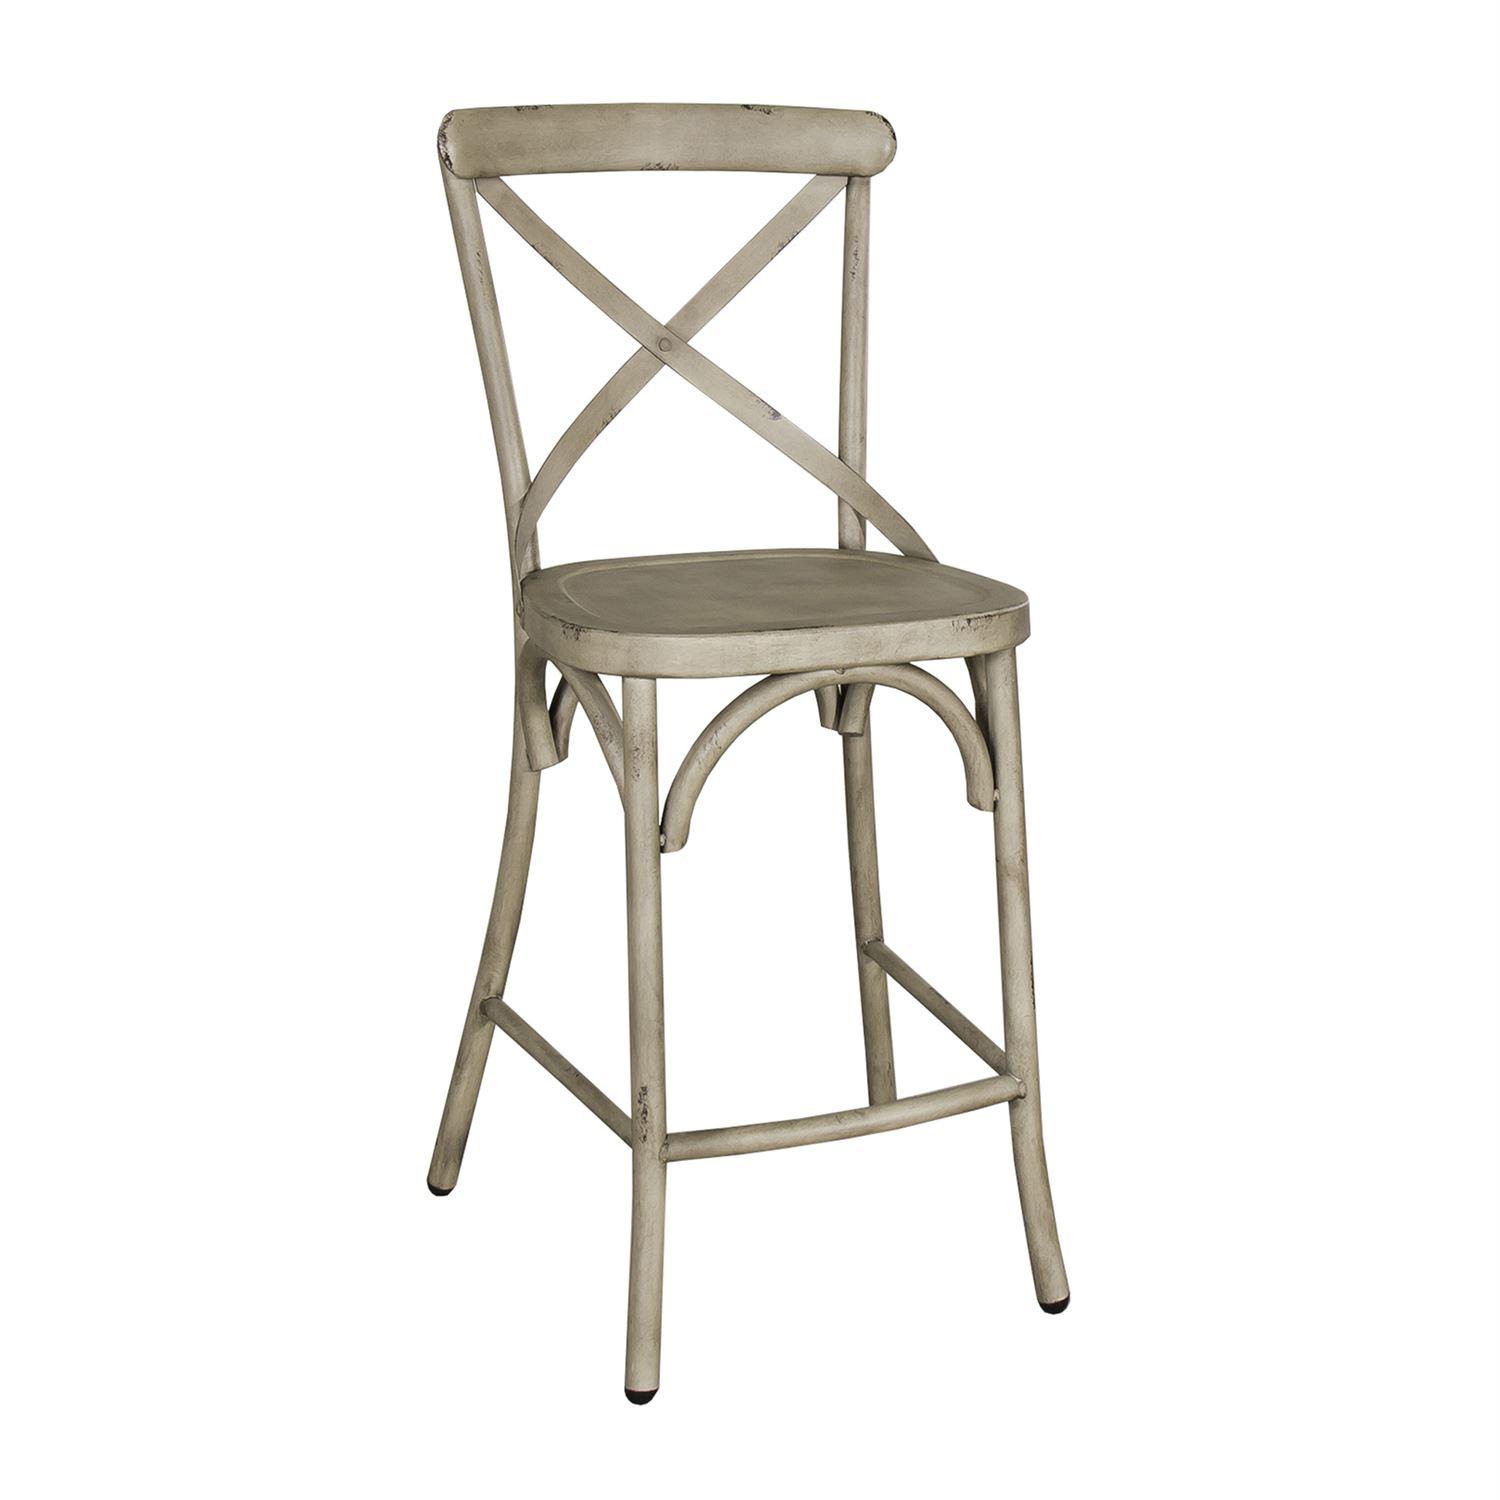   Vintage Series  (179-CD) Counter Chair  